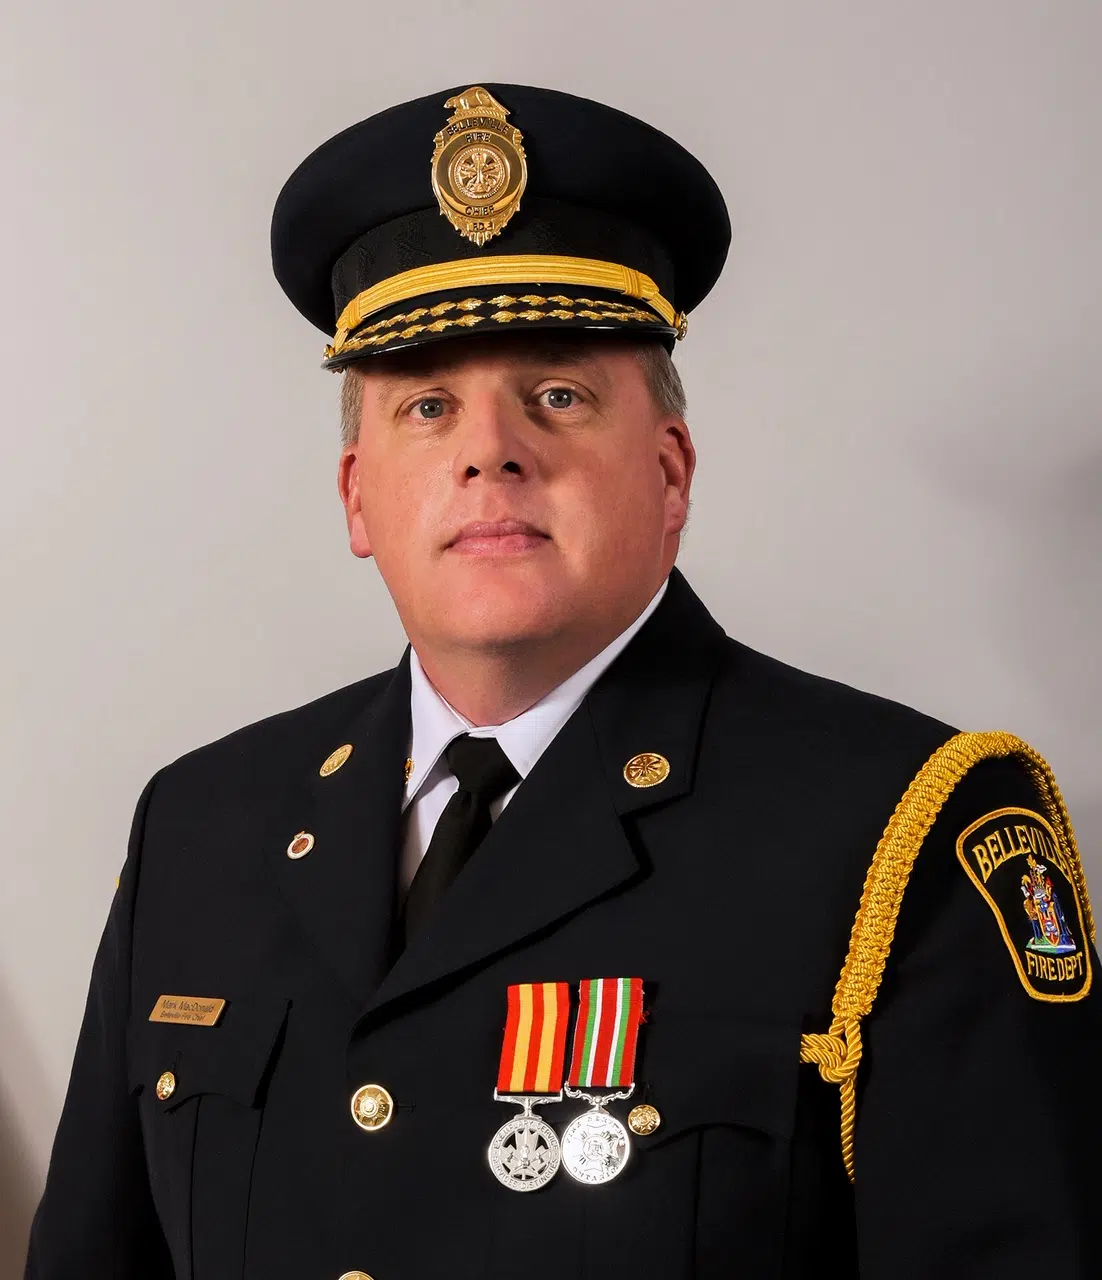 Belleville fire chief retires, new acting chief named